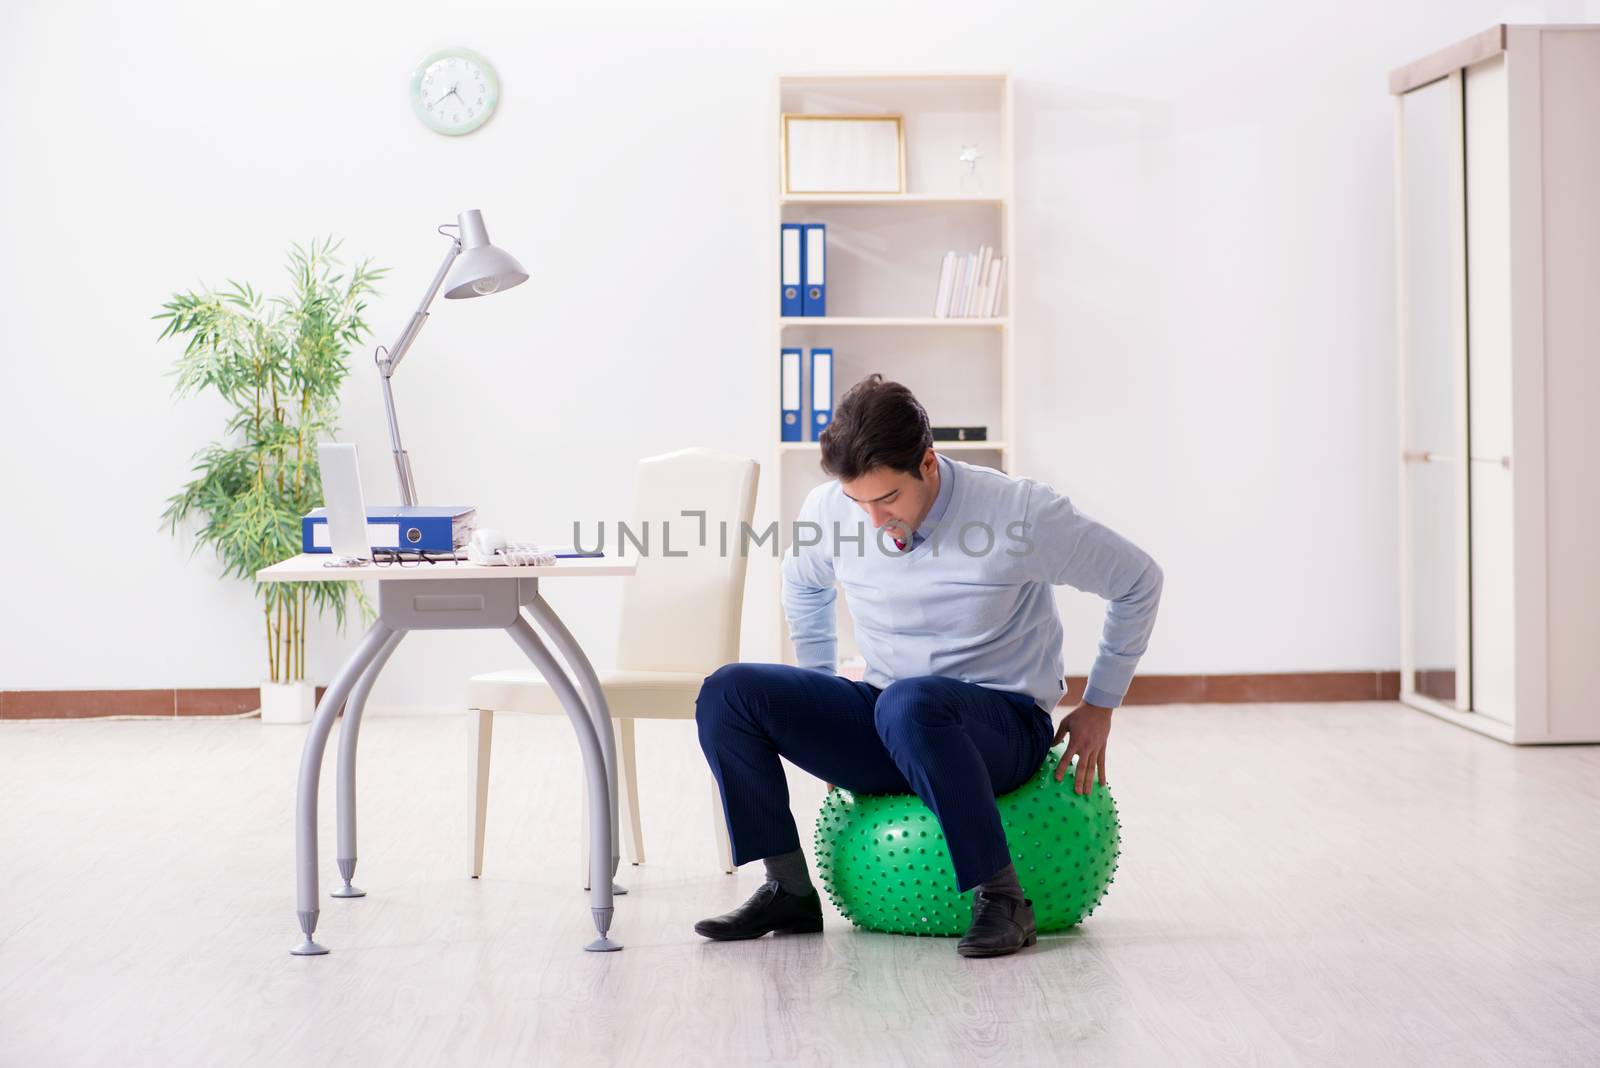 Employee exercising with swiss ball during lunch break by Elnur